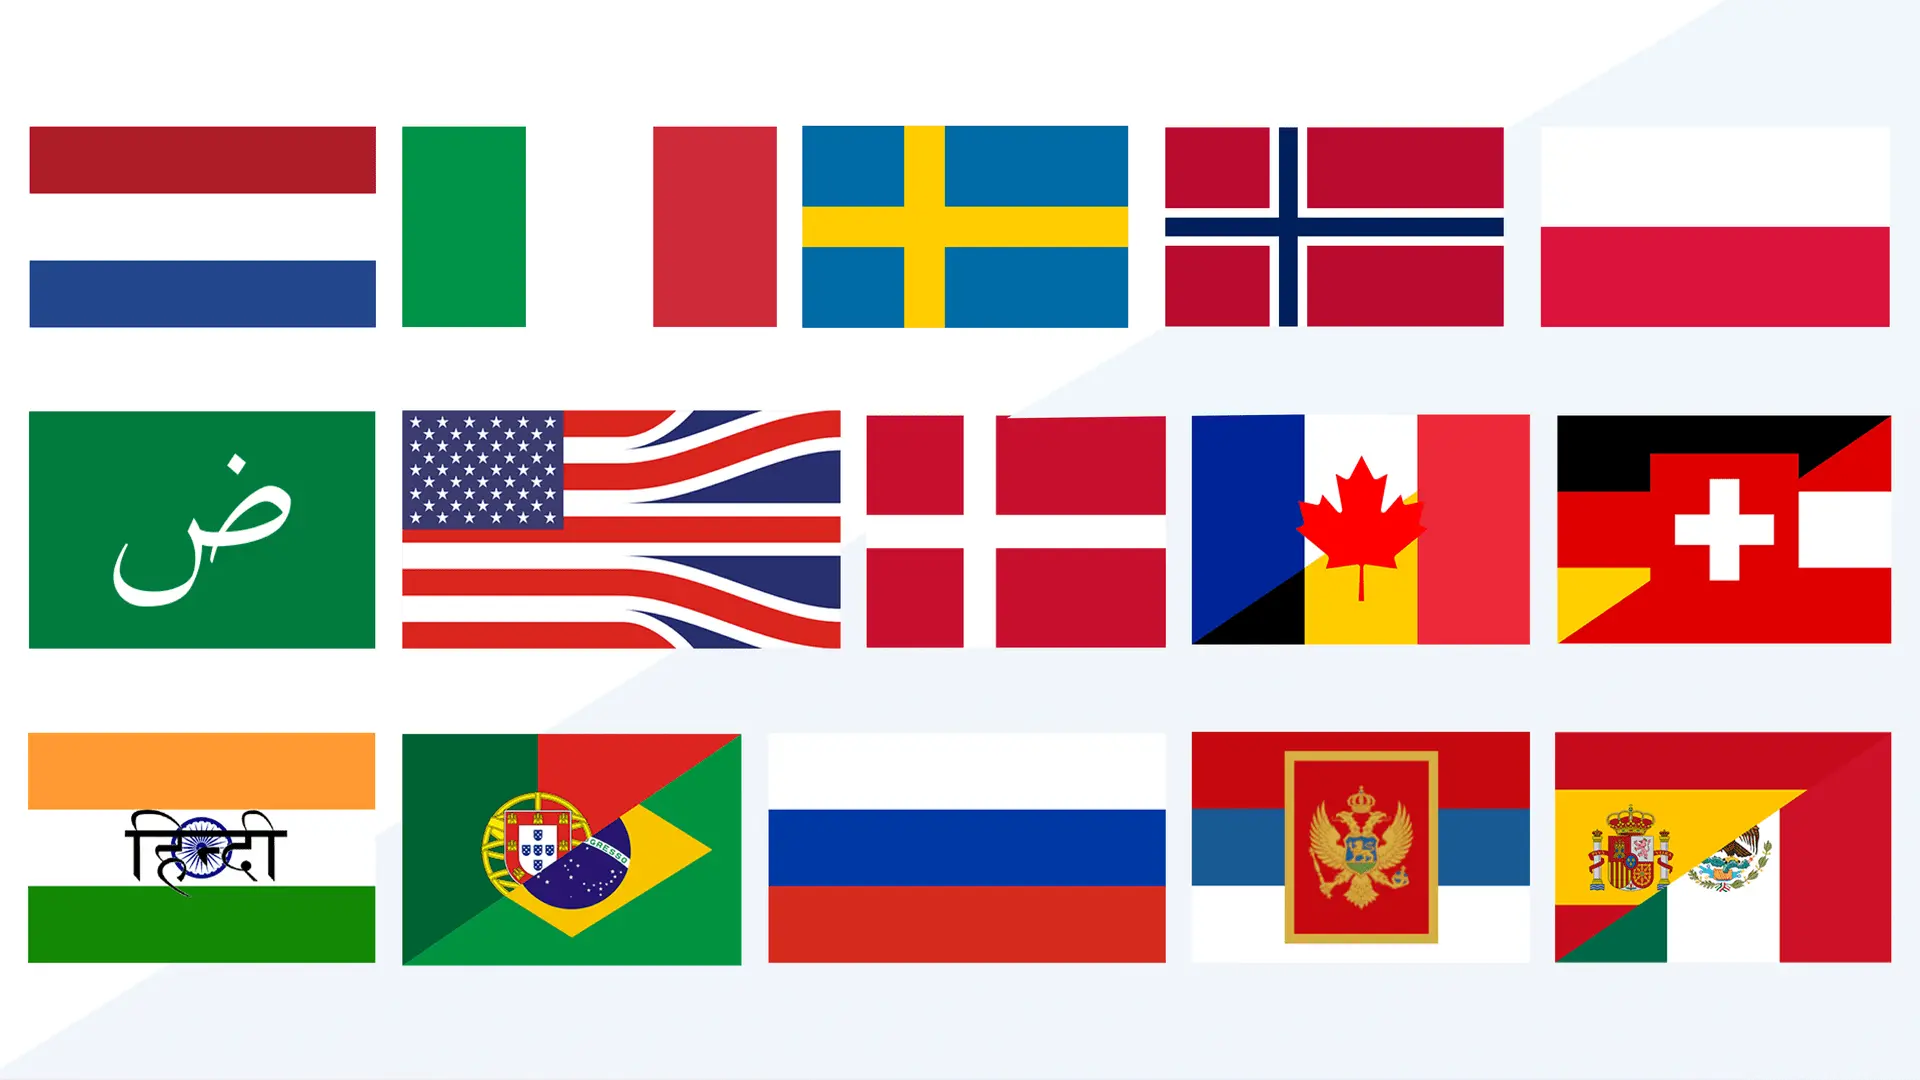 Graphic containing various country flags